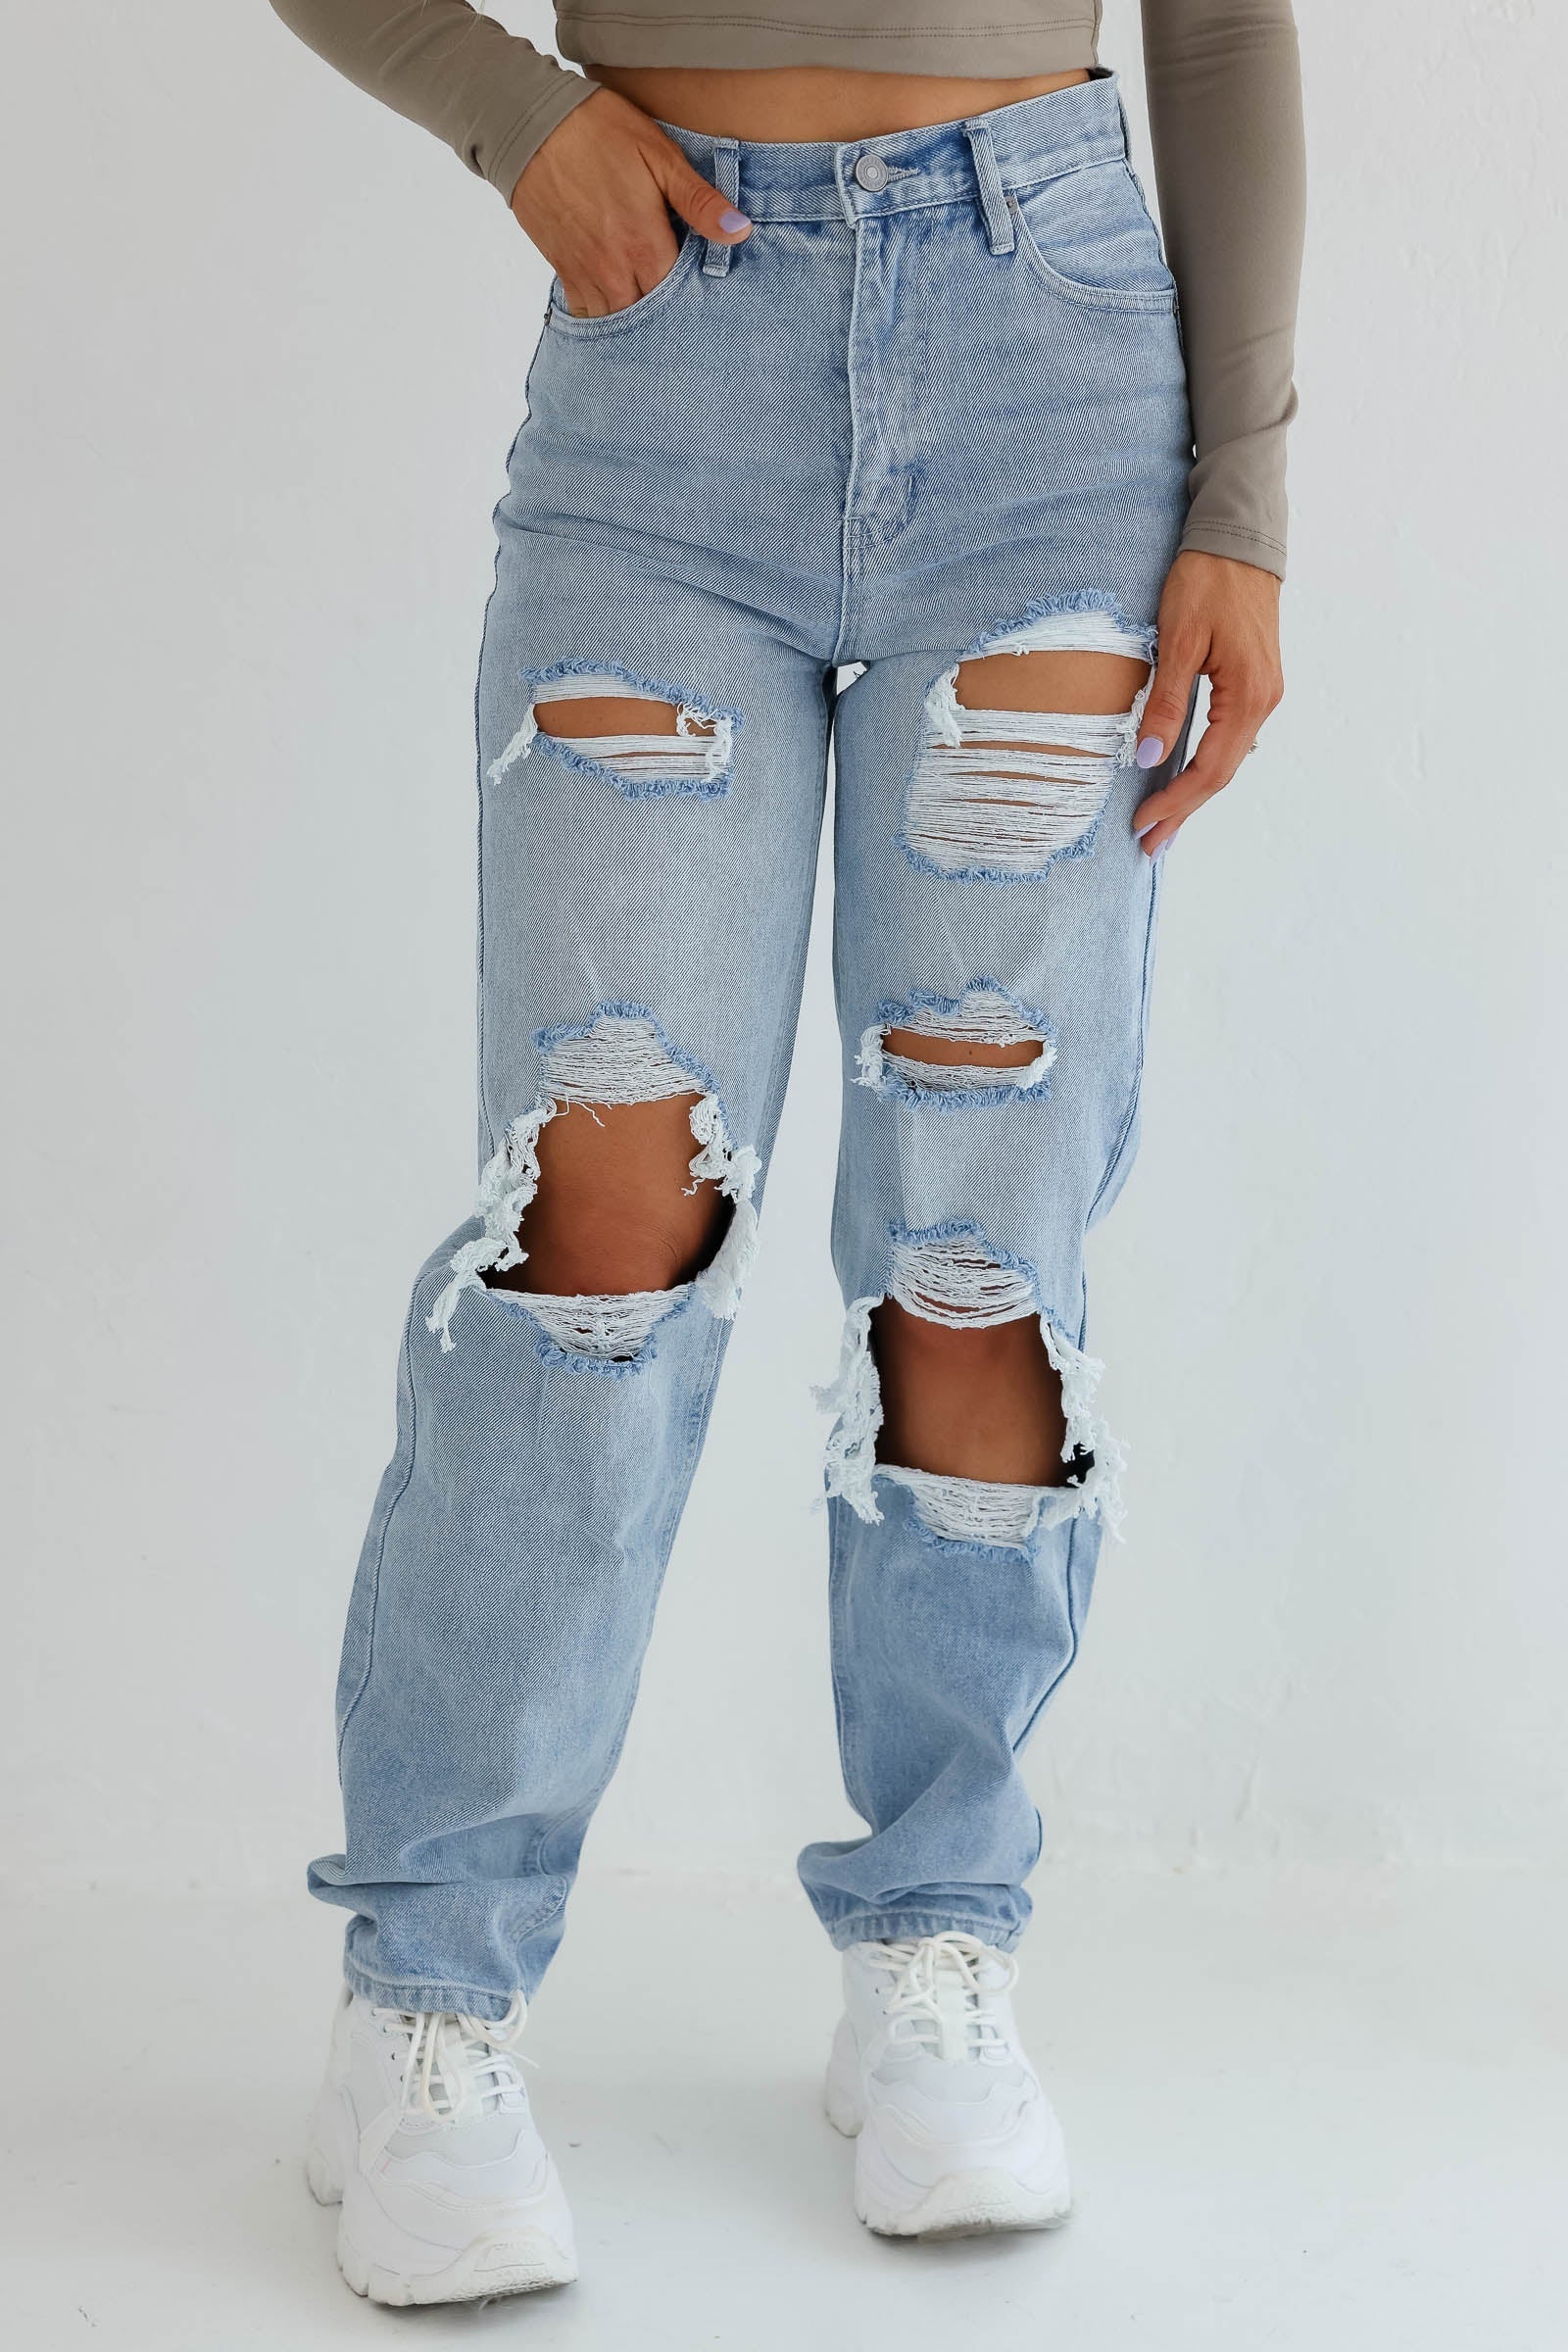 KANCAN Tyra High Rise 90s Distressed Jeans - Light Wash - Closet Candy ...